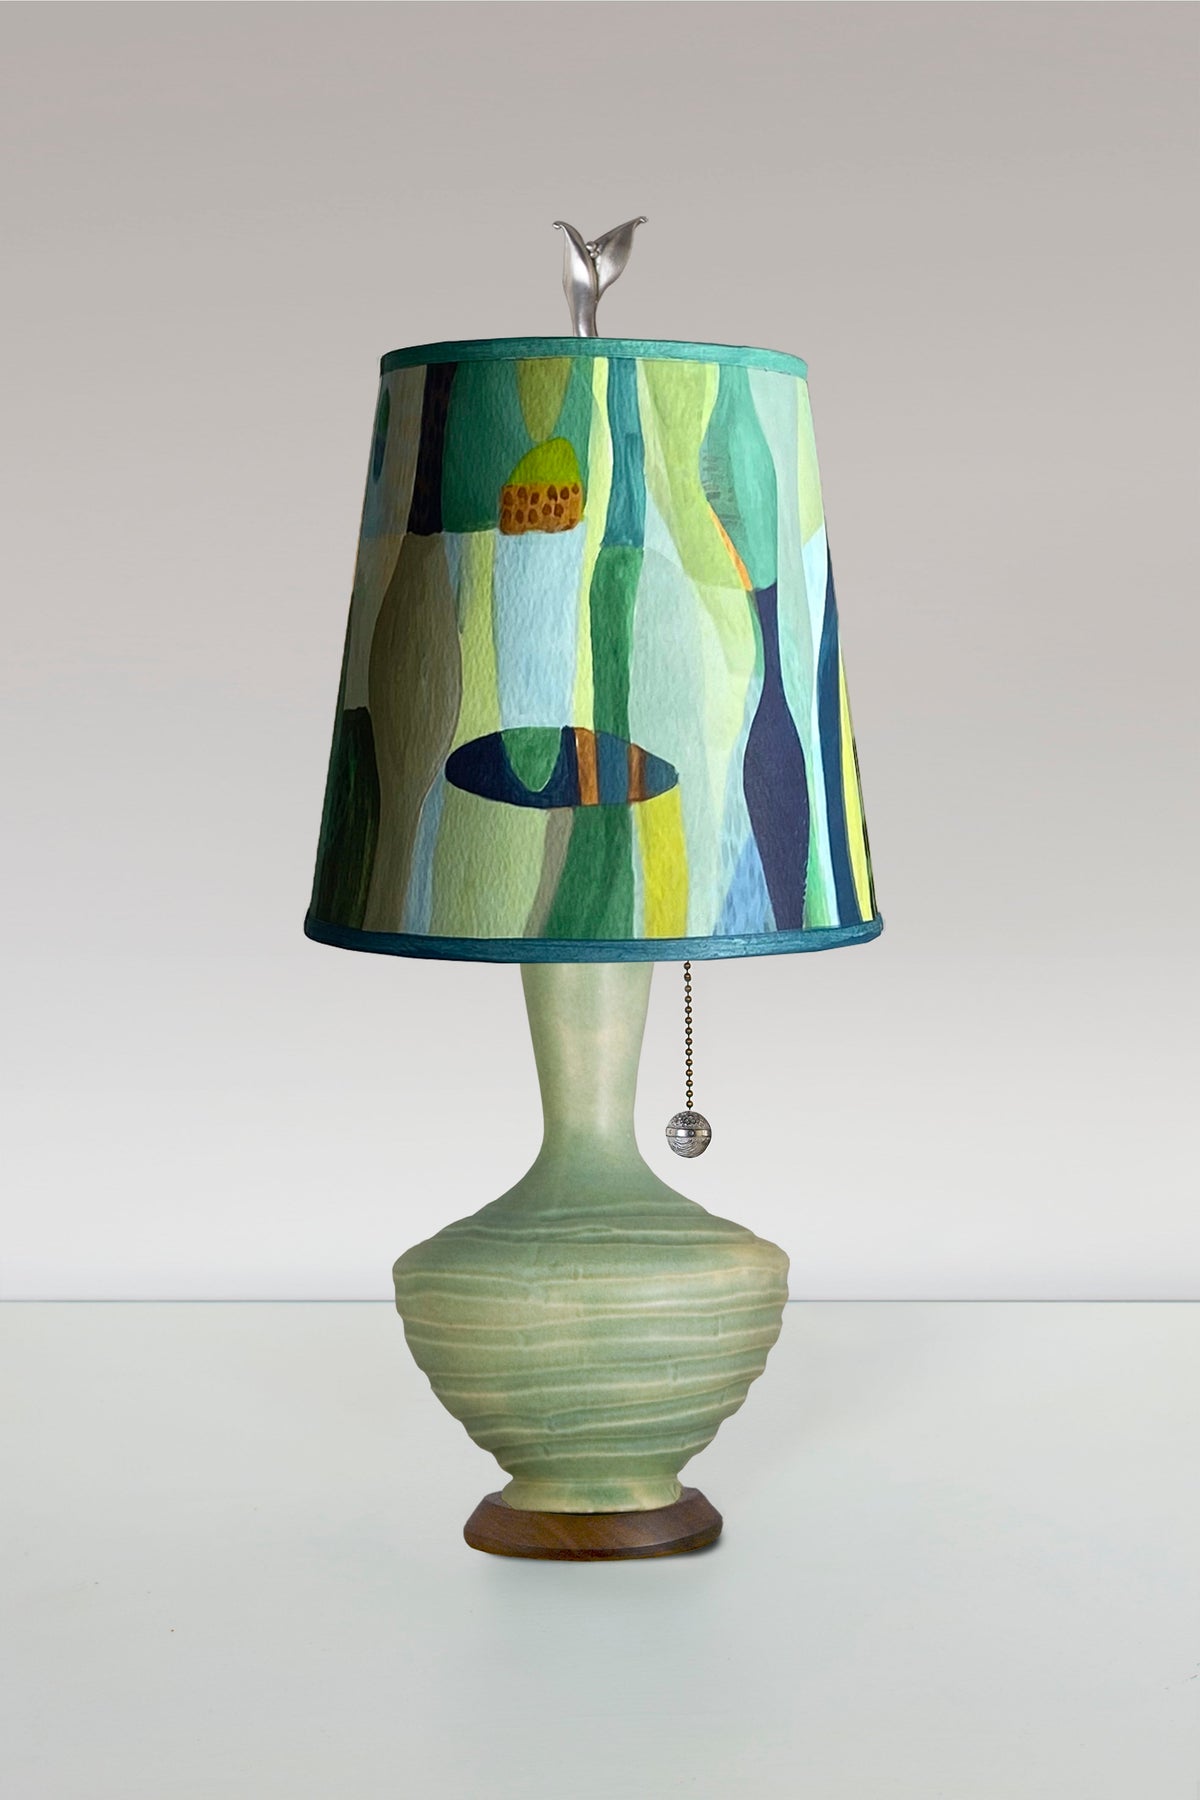 Ceramic Table Lamp in Old Copper with Small Drum Shade in Riviera in Citrus